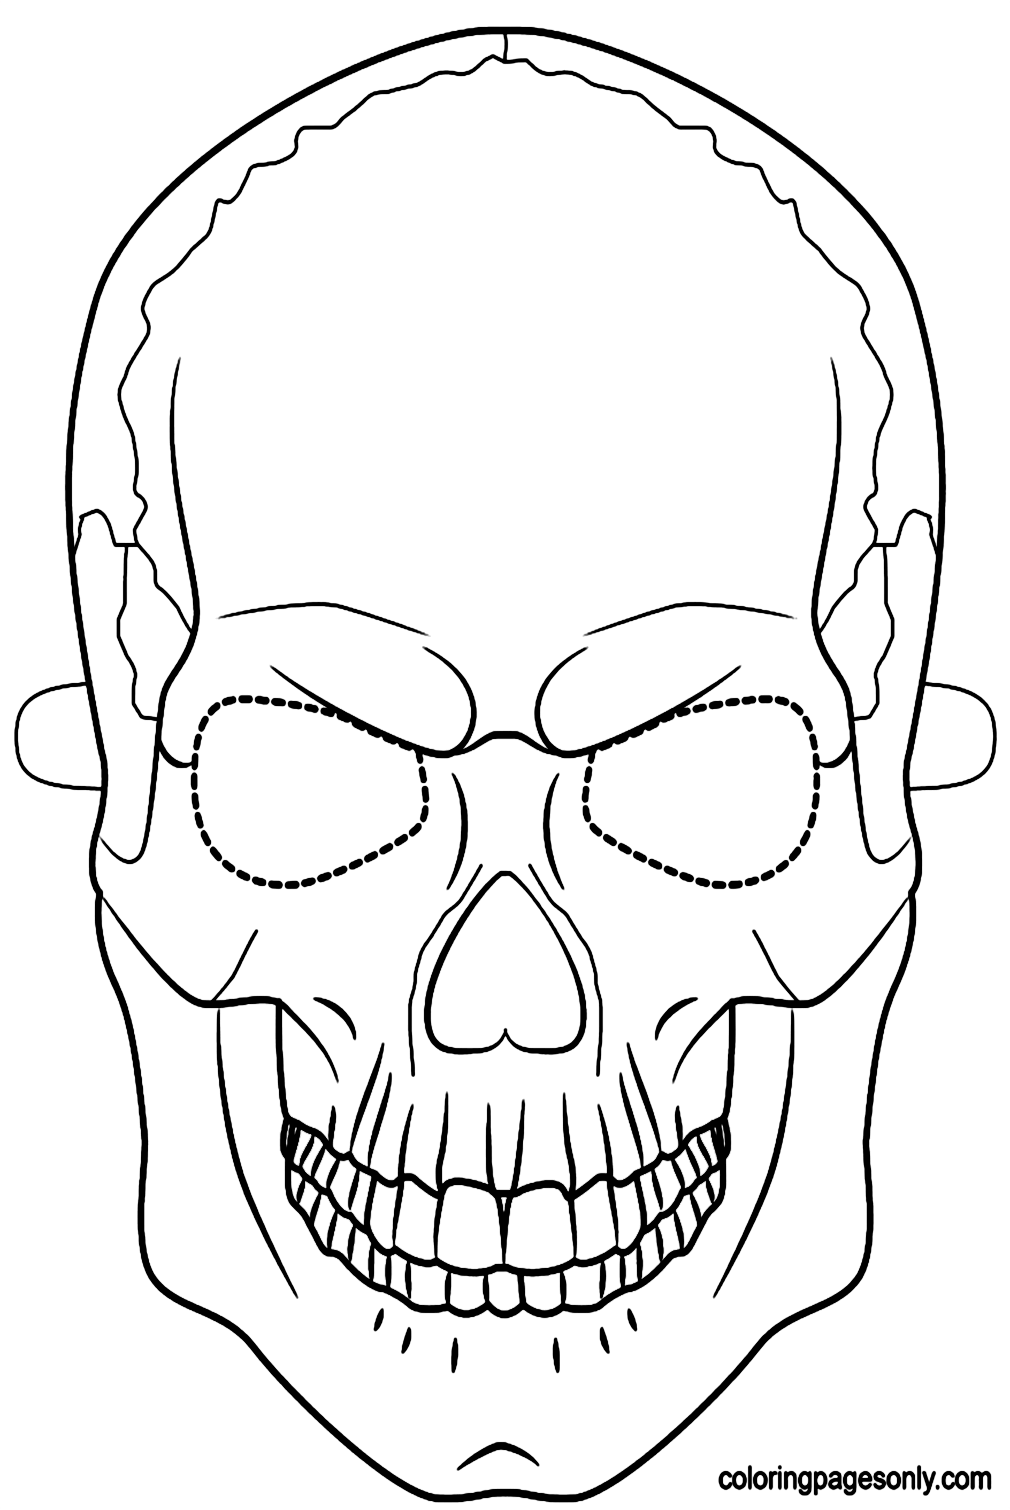 Halloween Skull Mask Coloring Pages